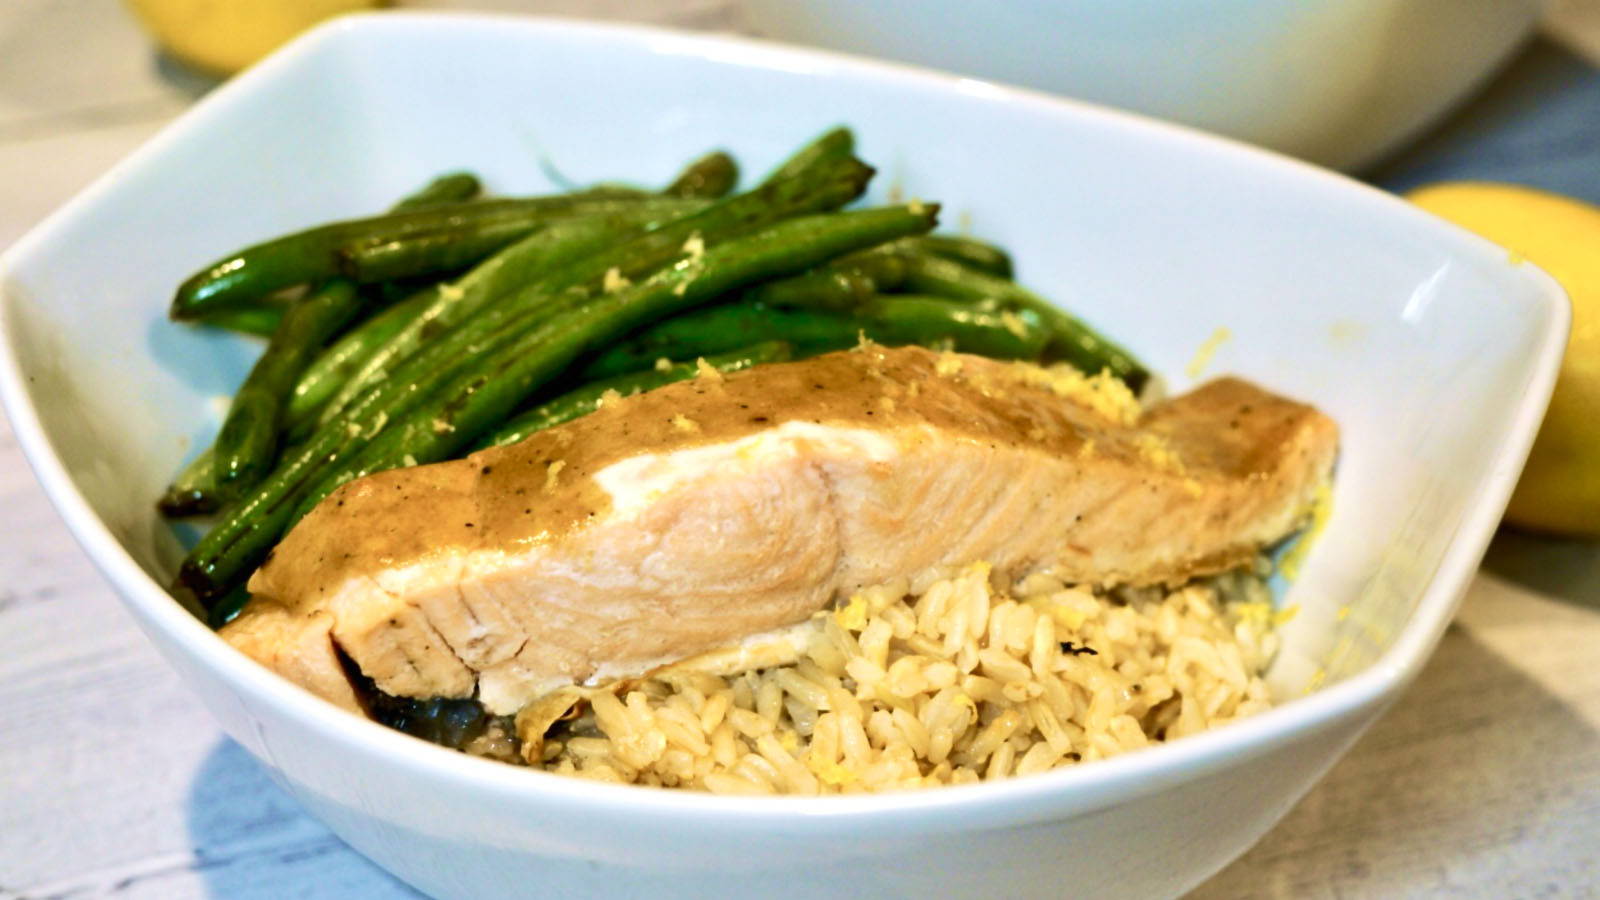 Gourmend recipe for low fodmap Dijon roasted salmon with balsamic green beans and brown rice